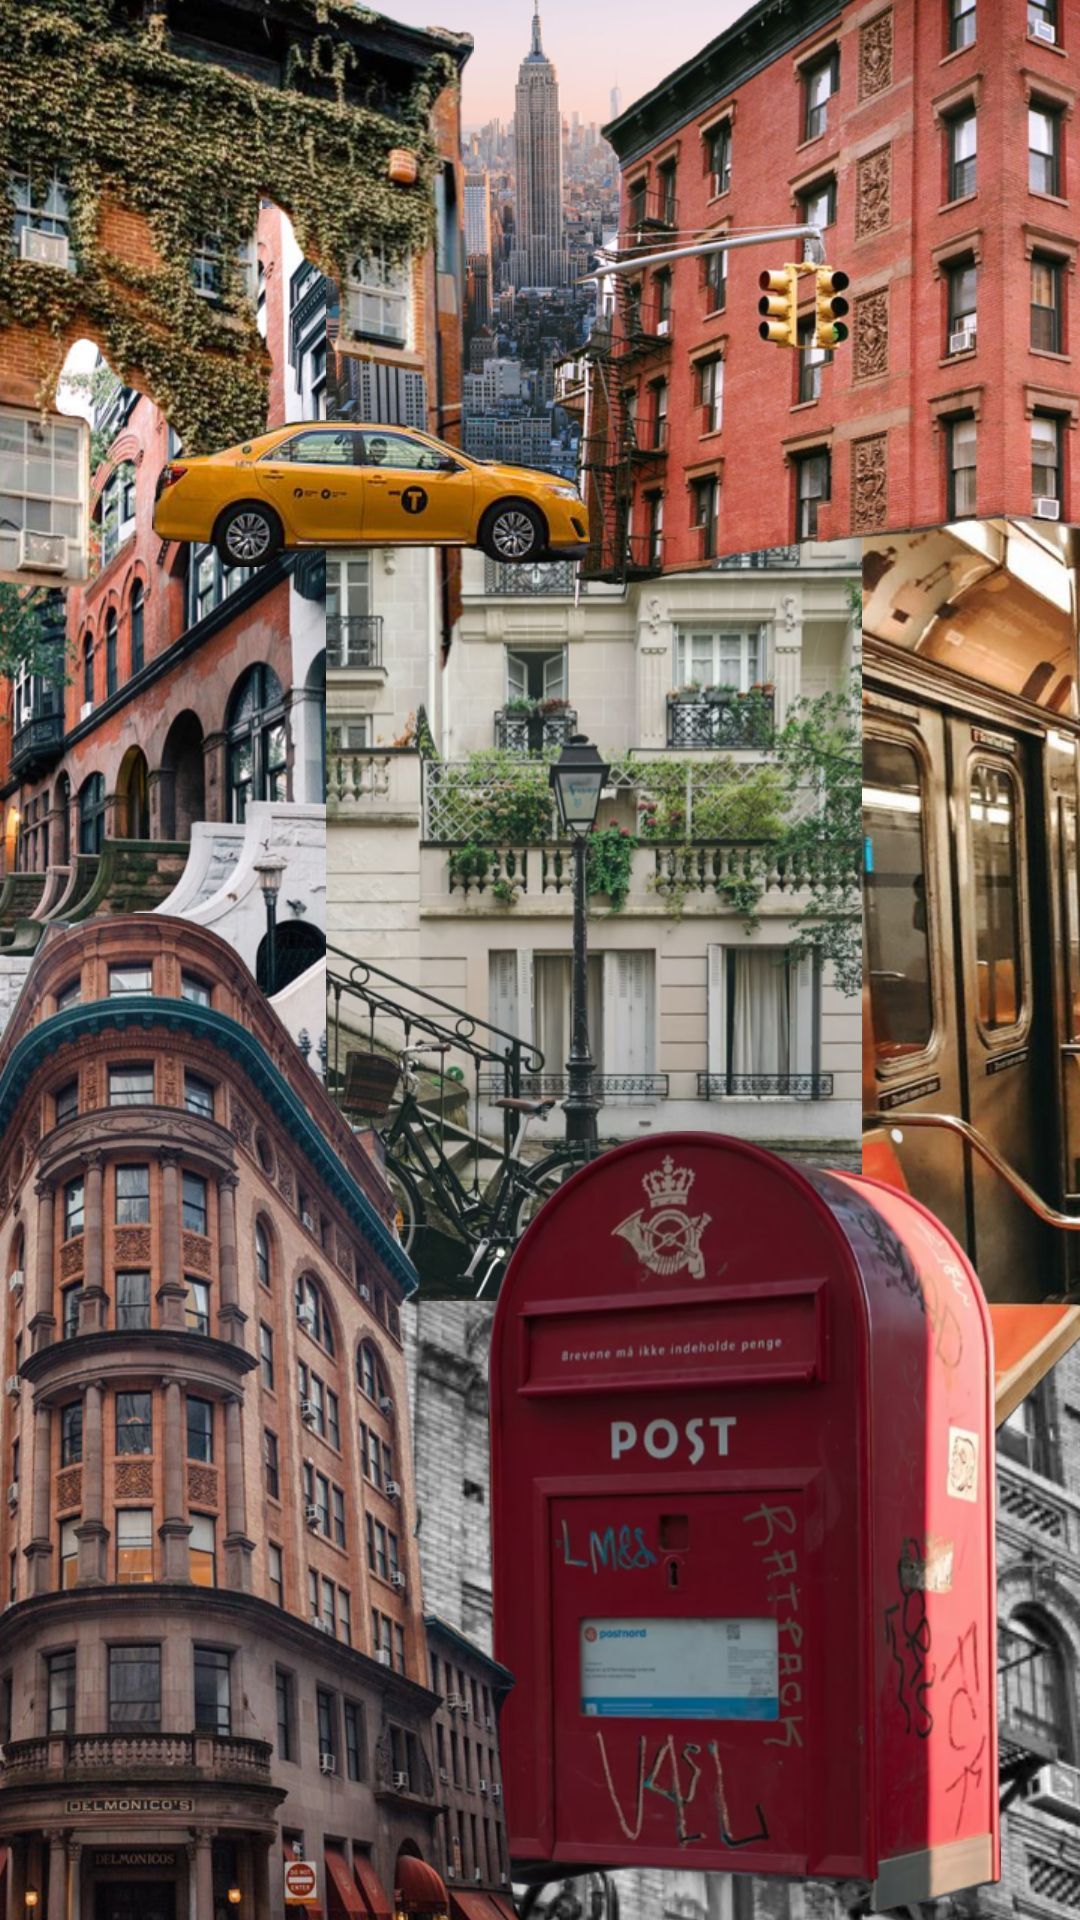 A collage of New York City buildings, cars, and street signs. - London